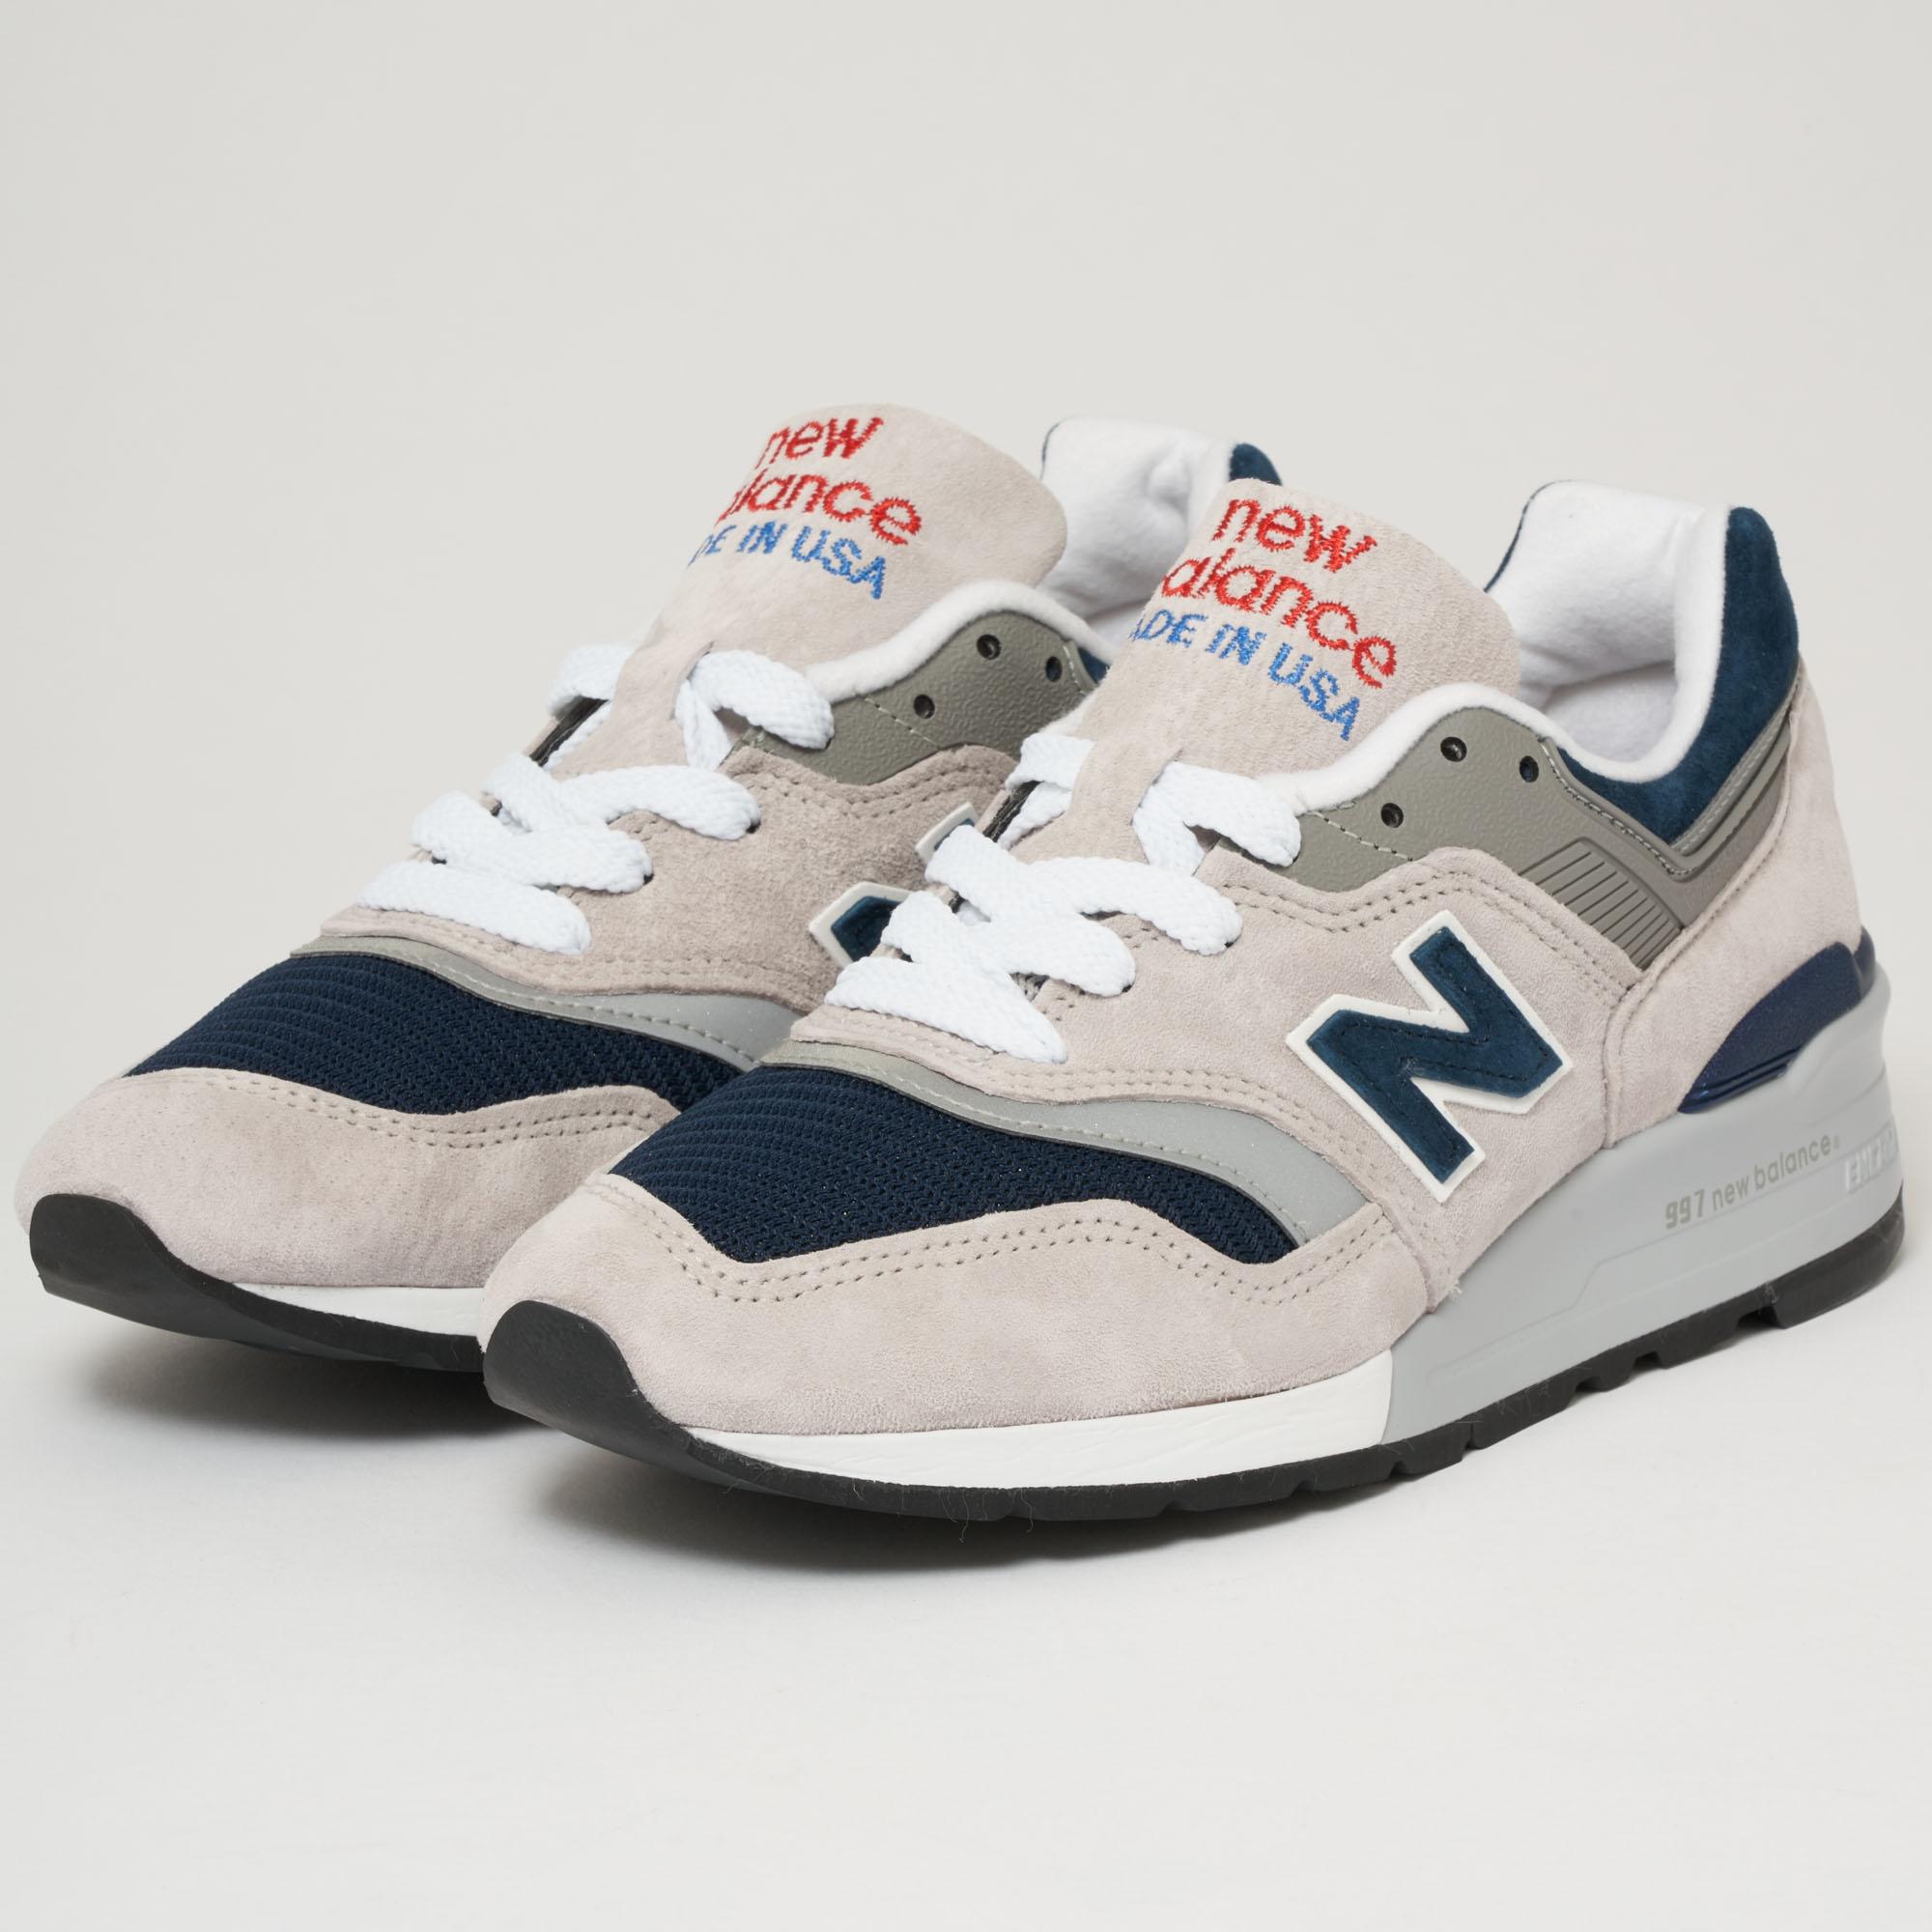 New Balance 997 Made In Us - Grey in Grey/Navy (Gray) for Men - Lyst